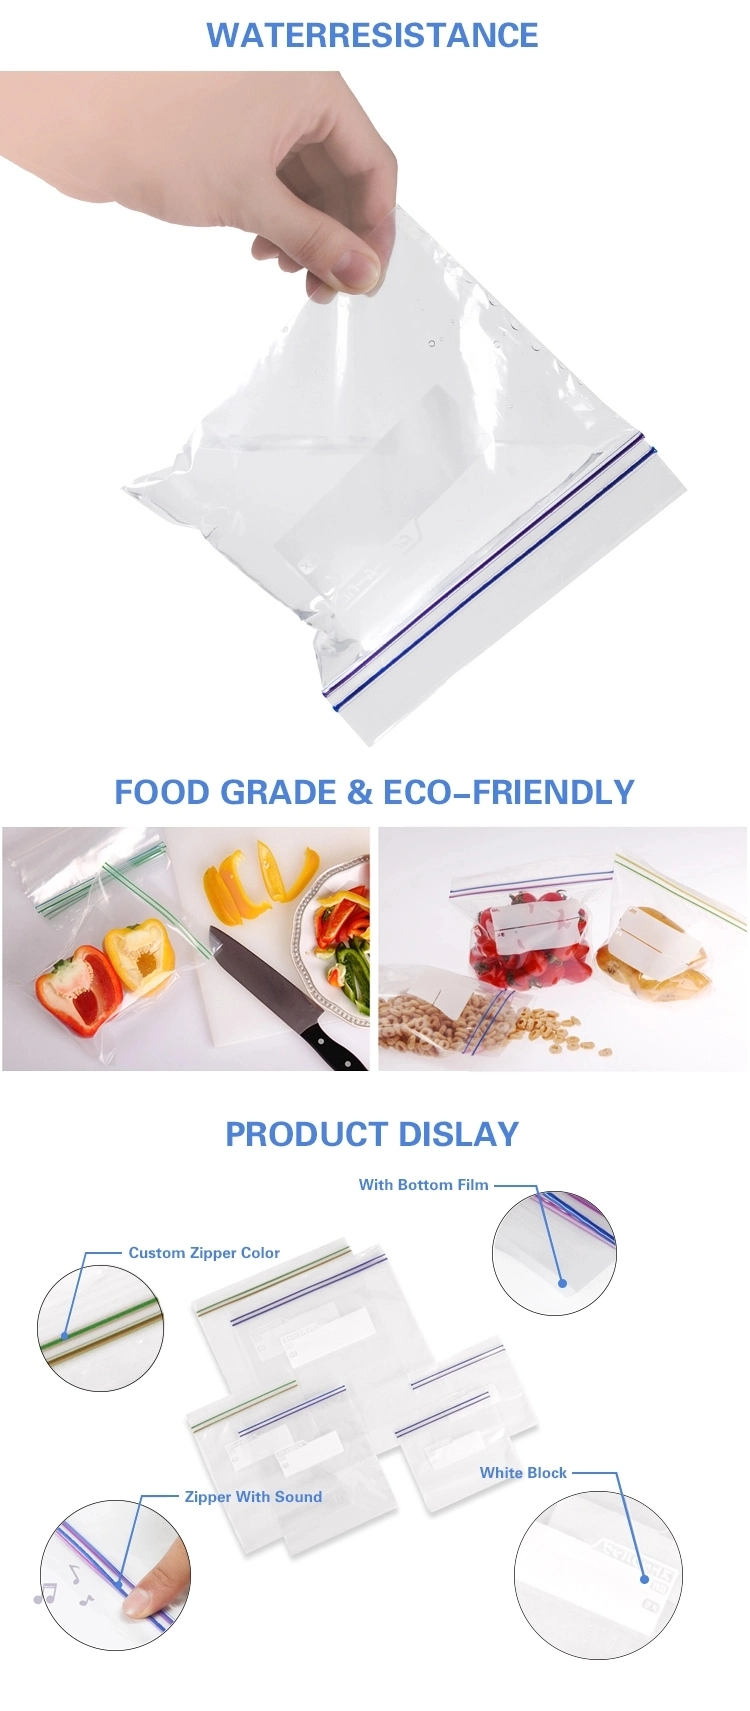 LDPE Material, Travle Box Packaging, Different Size Zipper Bag